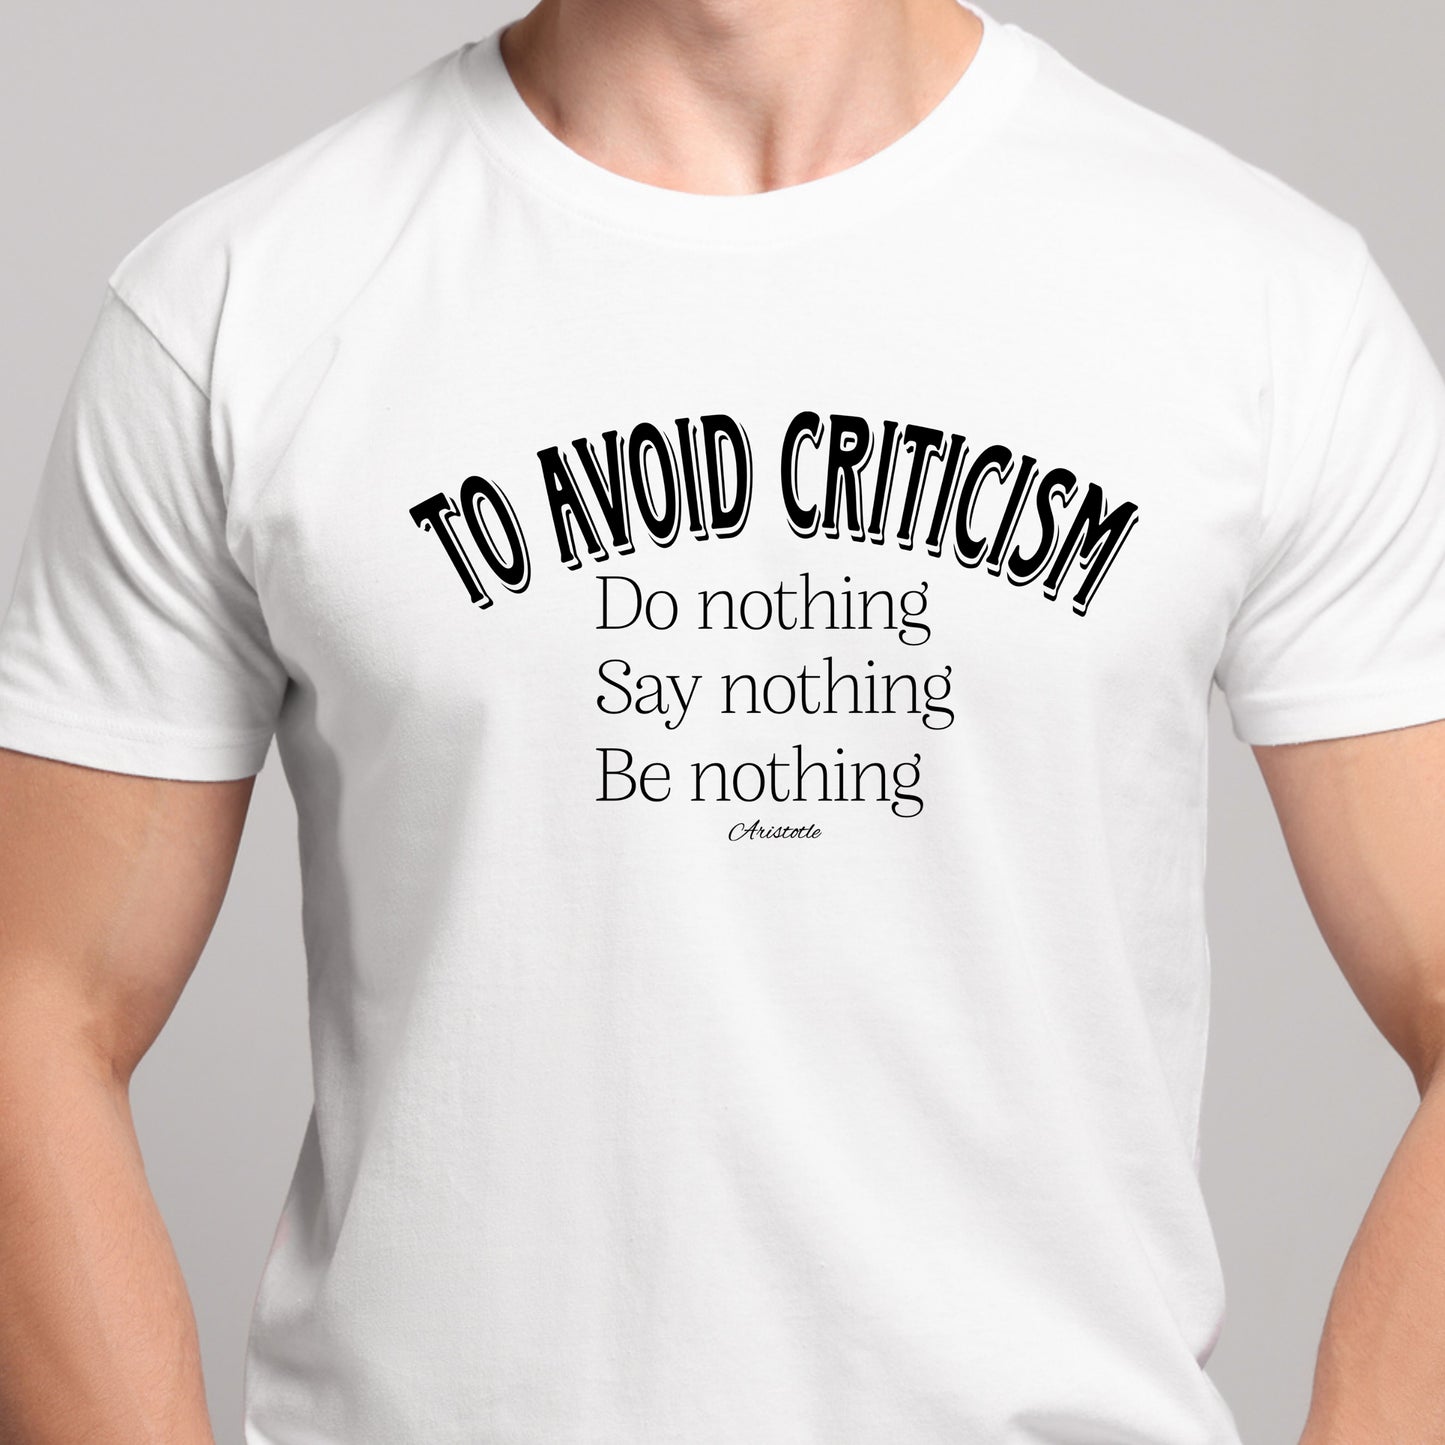 classic t-shirt with arched black text reading To avoid  criticism, and listed below, Do nothing, Say nothing, Be nothing, with smaller font below reading Aristotle. Shirt available in several colors.